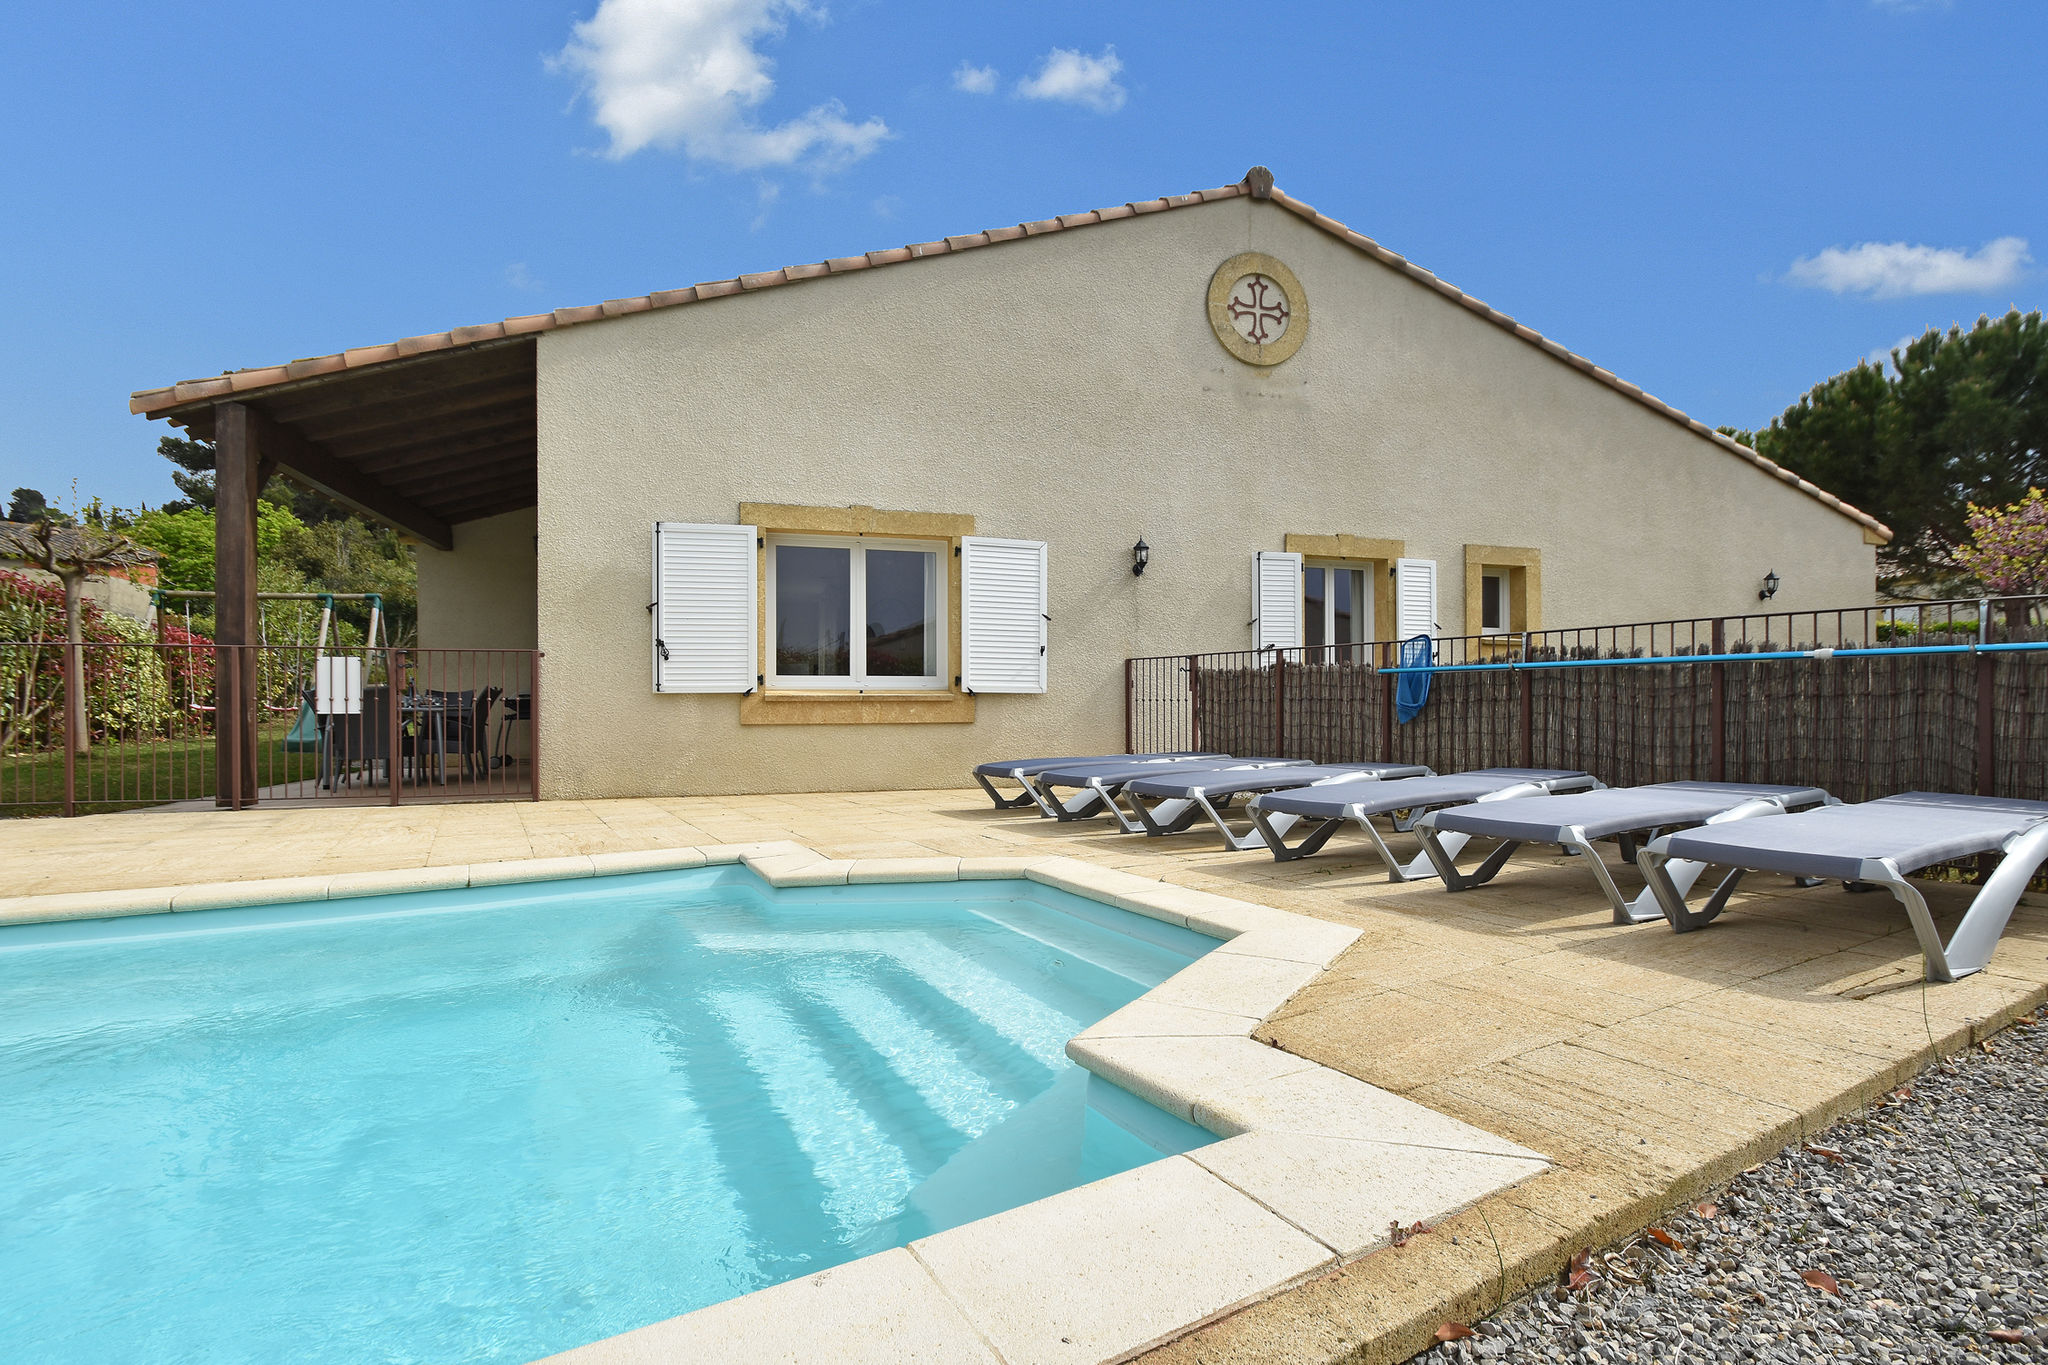 Villa with air-con, heated pool, bubble bath, fenced garden and kids play equipment